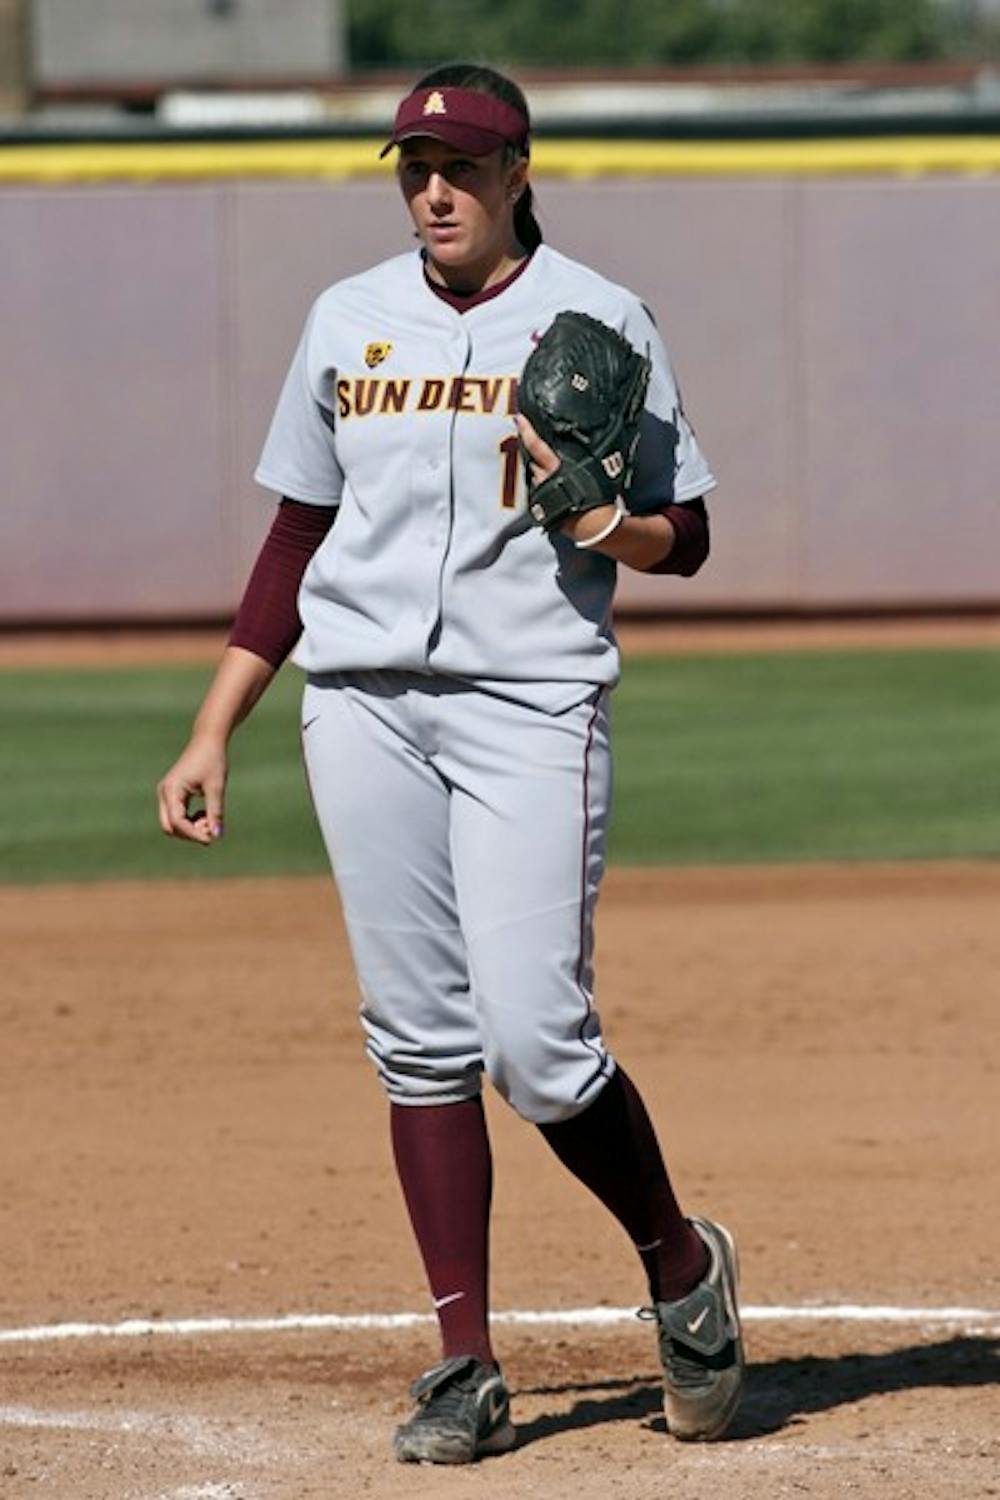 Hillary Bach stands in the pitcher’s circle during a game against New Mexico State on March 11. Bach and the Sun Devils will play host to the erratic No. 16 Cardinal this weekend. (Photo by Sam Rosenbaum)